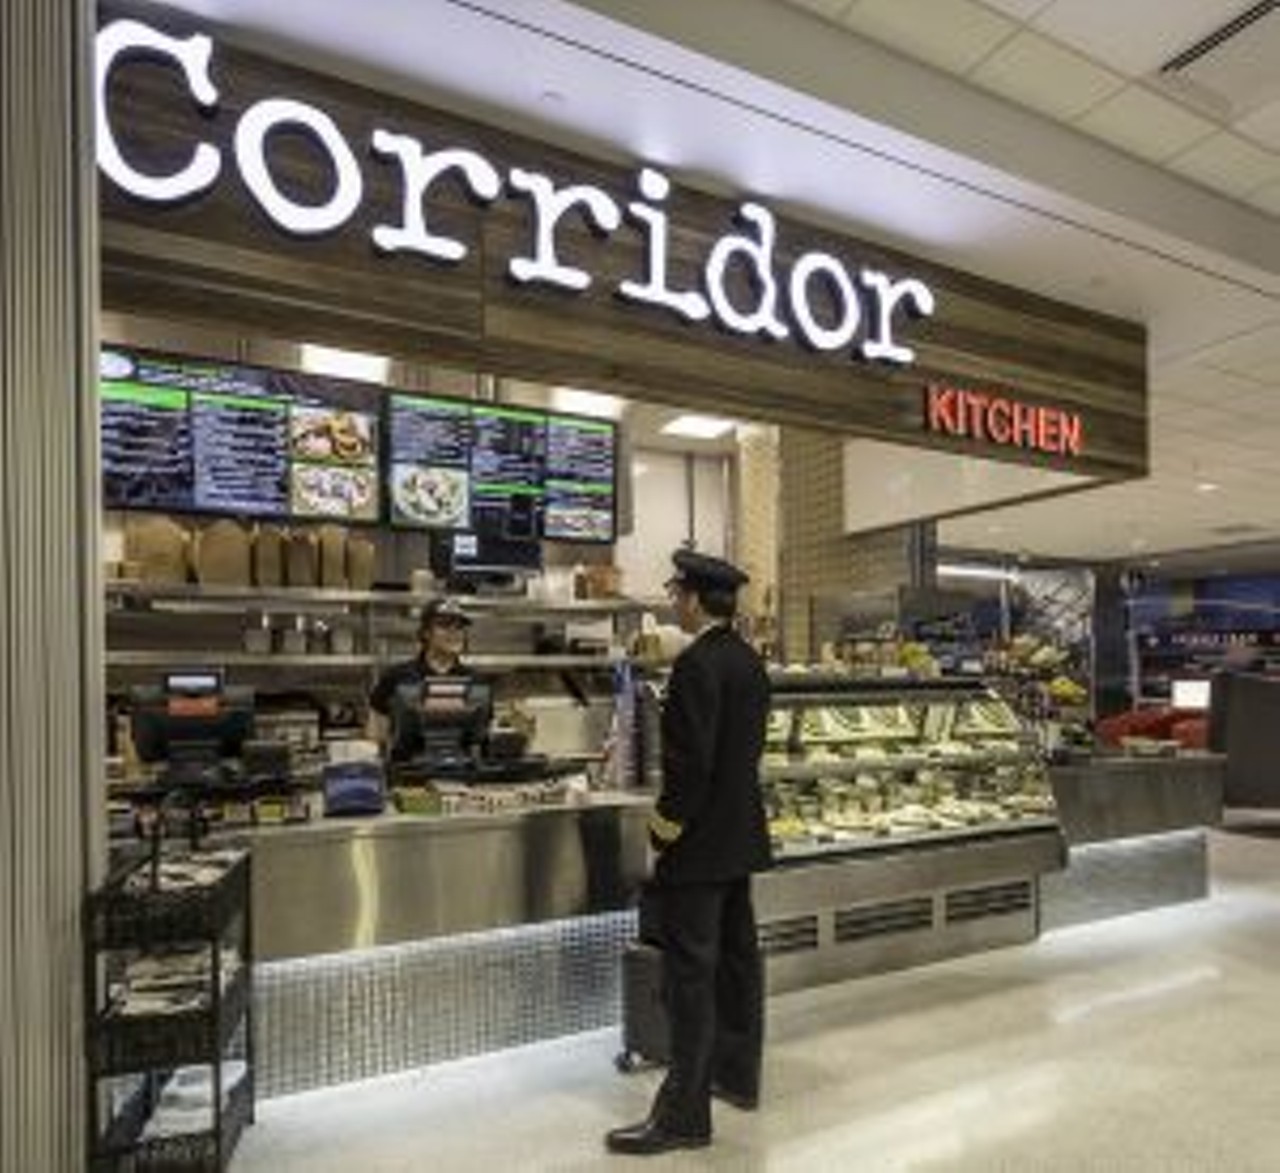 Corridor Kitchen
Eastern Market's Corridor Sausage recently unveiled its airport dining concept. Offering the company's creative and delicious sausages as well pastas. [A1]